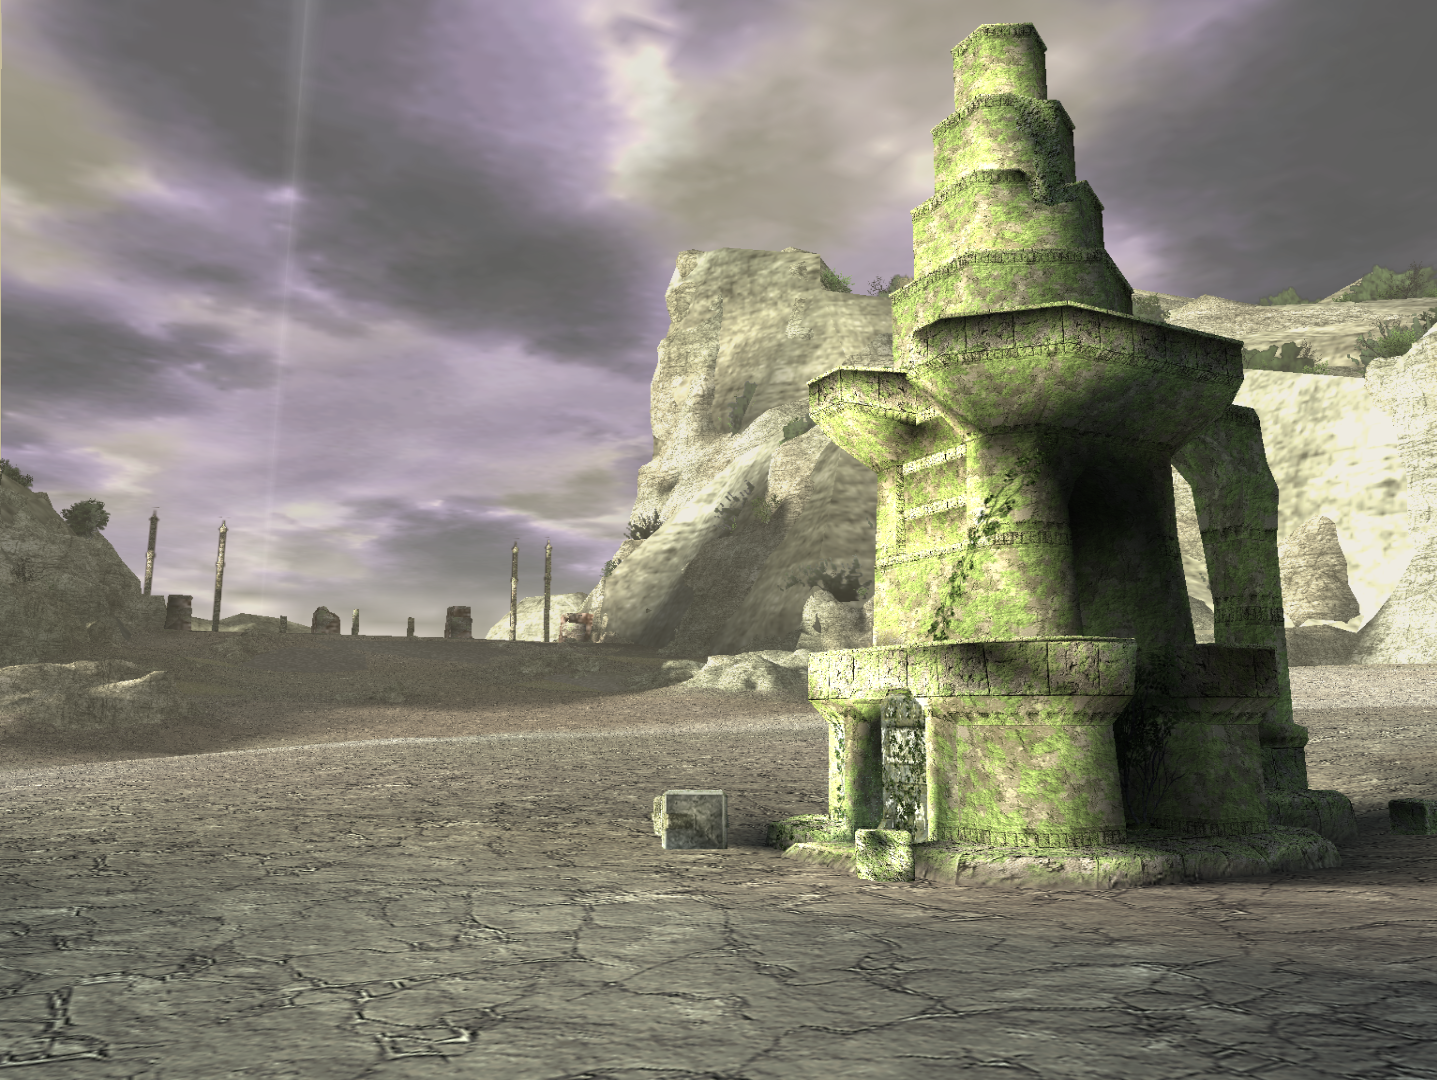 Shadow of the Colossus (PS4) Guide: Shrines, Lizards, Fruit, Coins